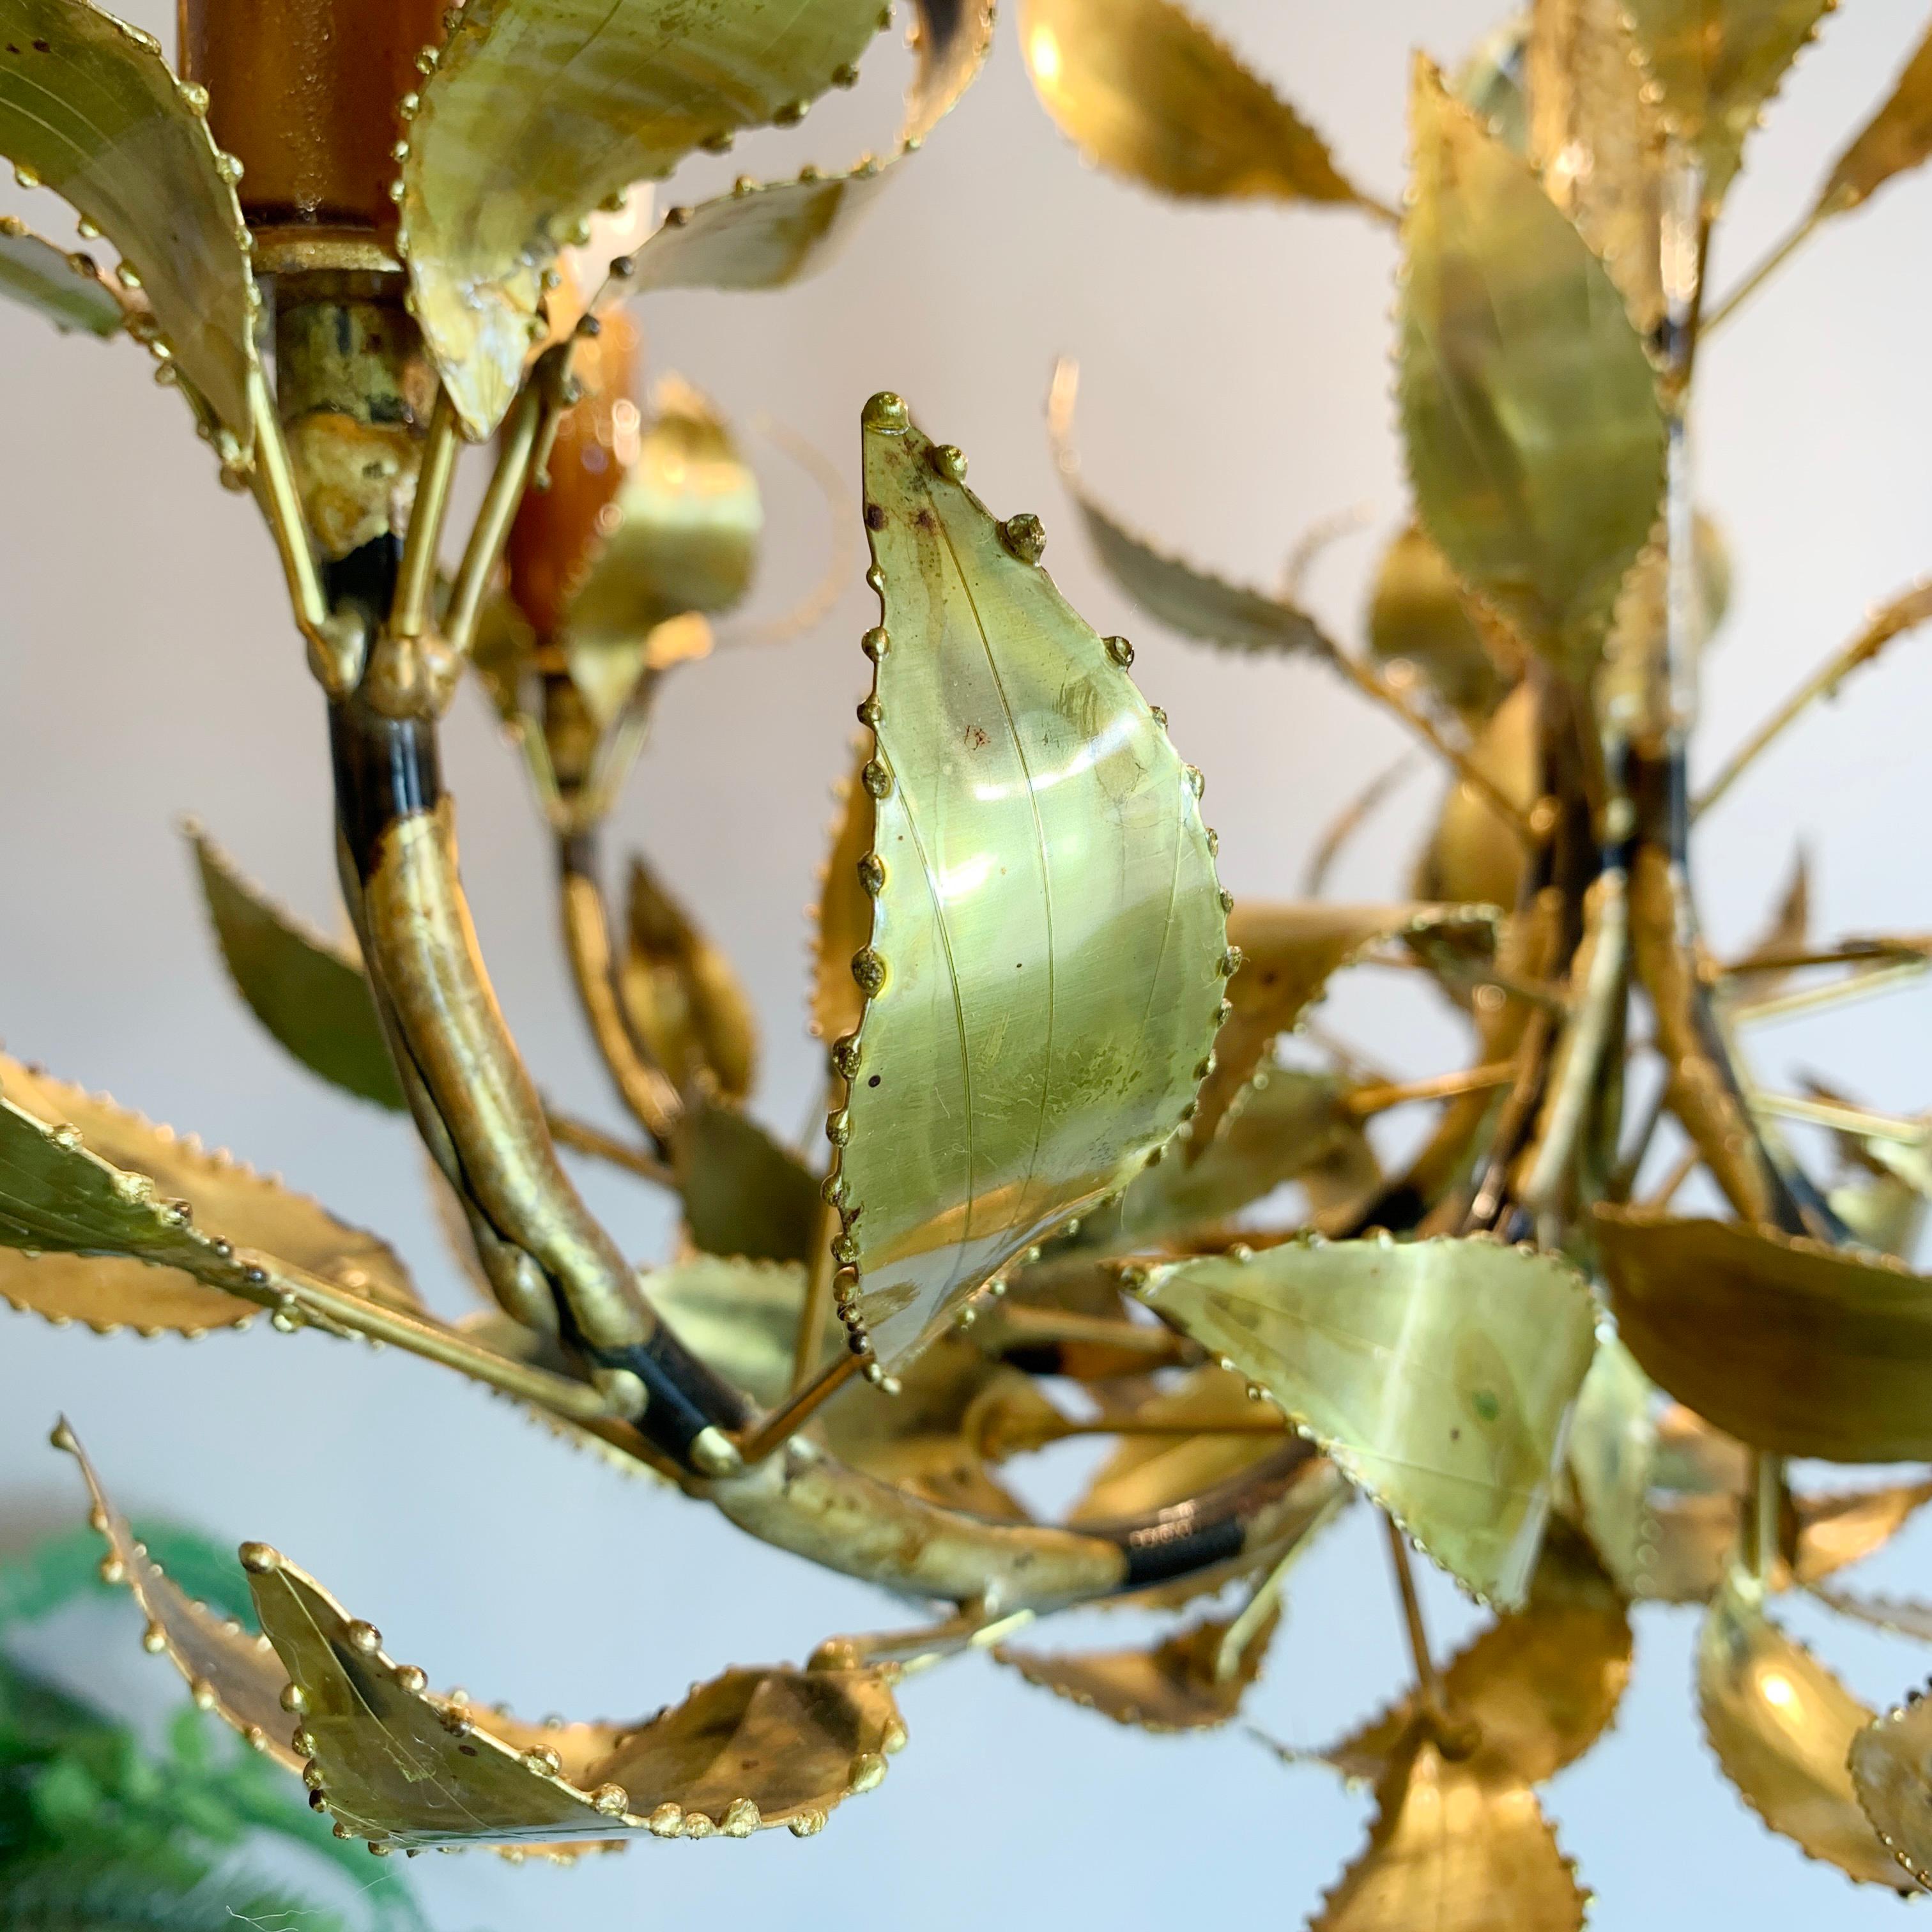 Rare Maison Jansen att handcrafted brass leaf chandelier. France, c' 1960's.
Fabulous chandelier laden with the Classic hand cut and burnished brass leaves of Maison Jansen.
The main arm is flanked with multiple leaves 7 stems leading out to 5